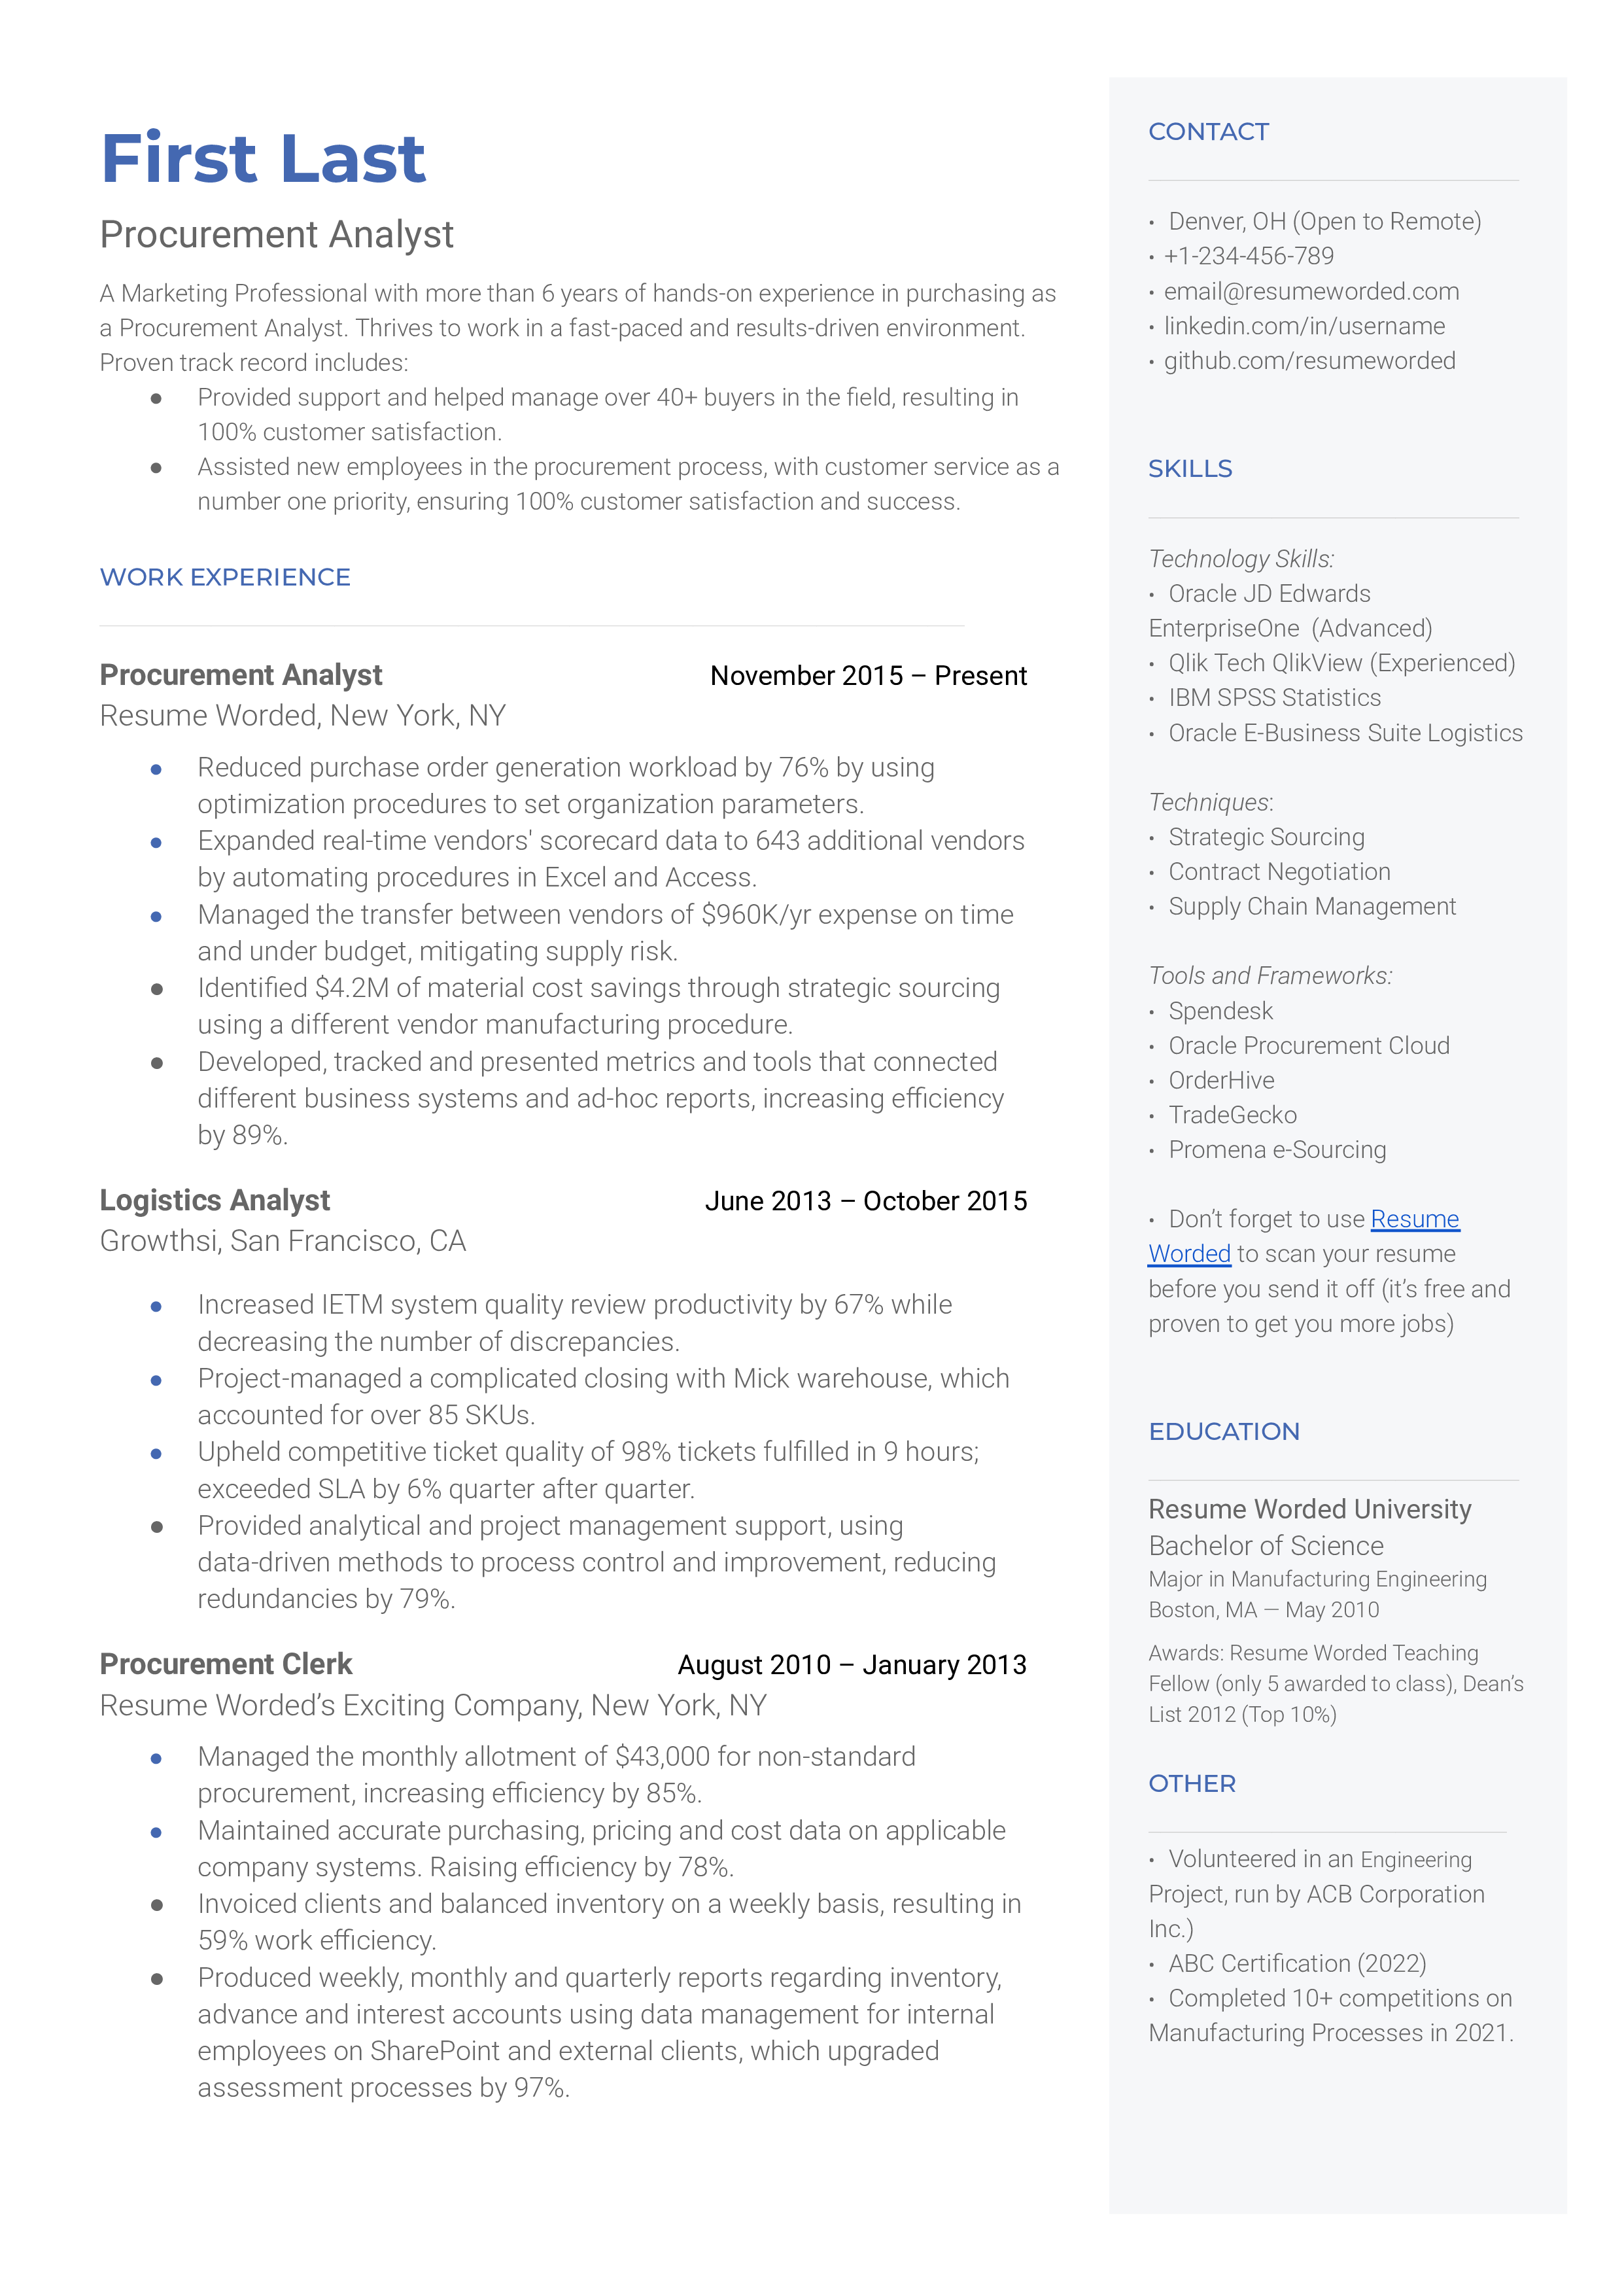 A procurement analyst resume sample that highlights the candidate's achievements and long-term experience.